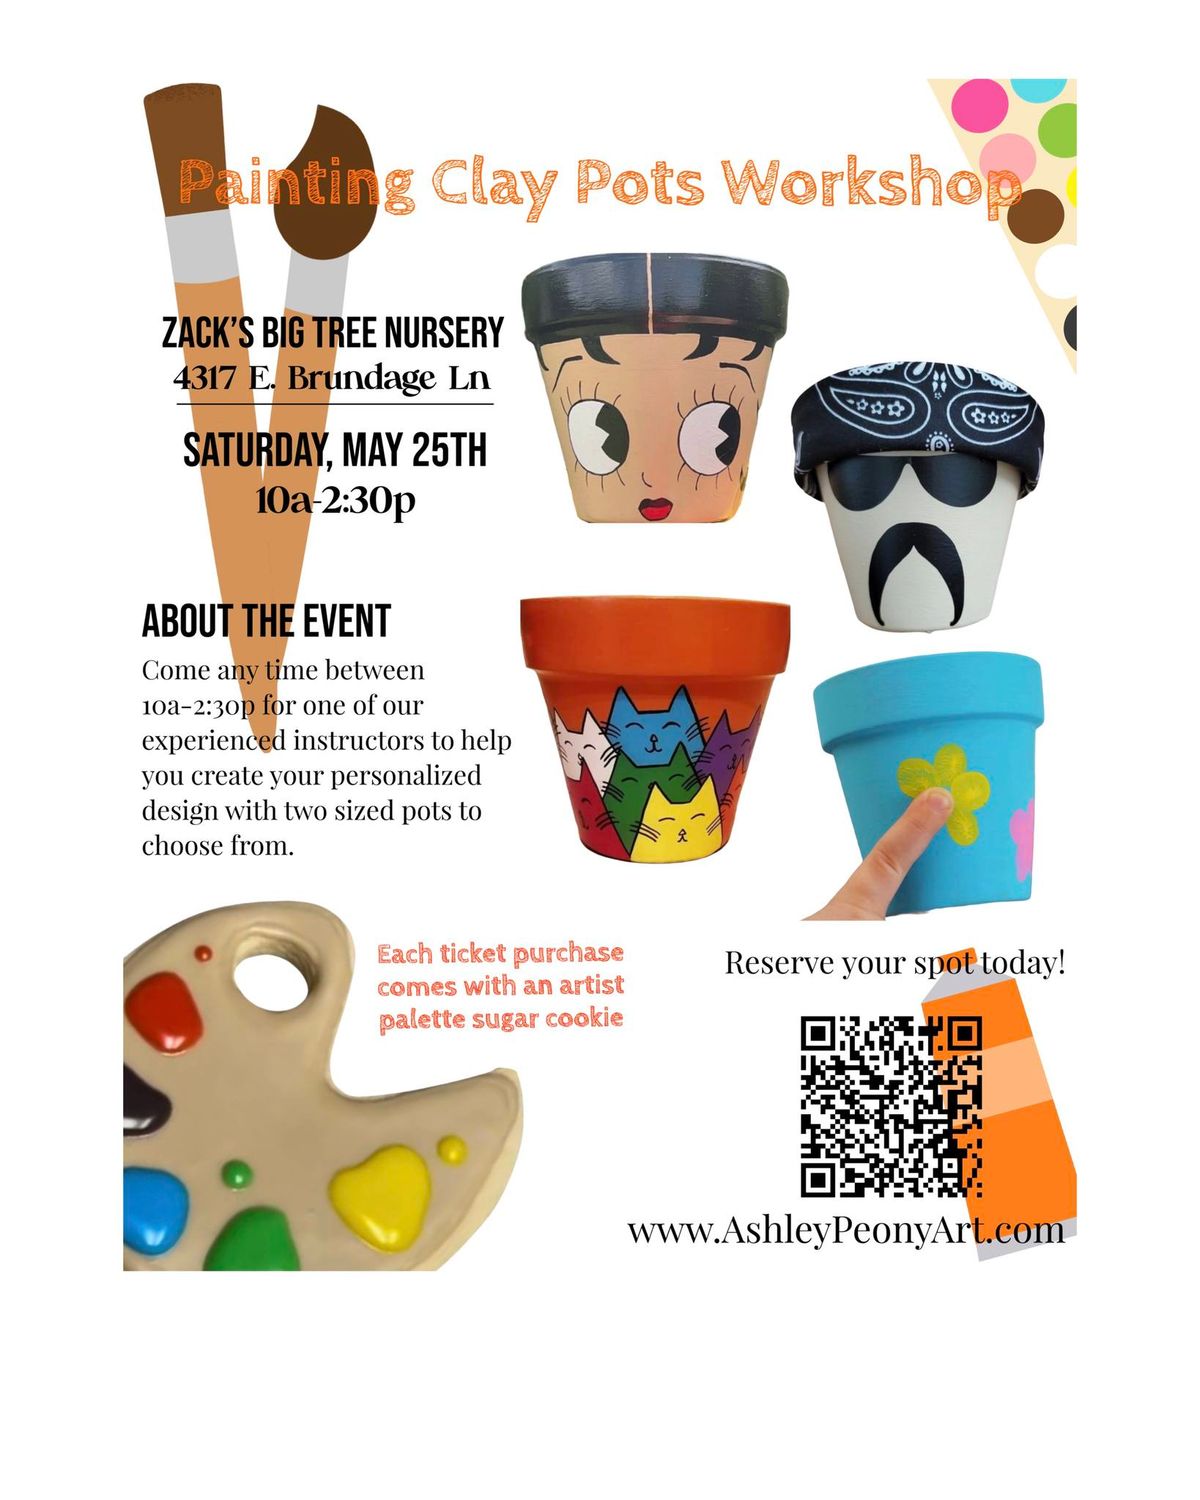 Painting Clay Pots Workshop